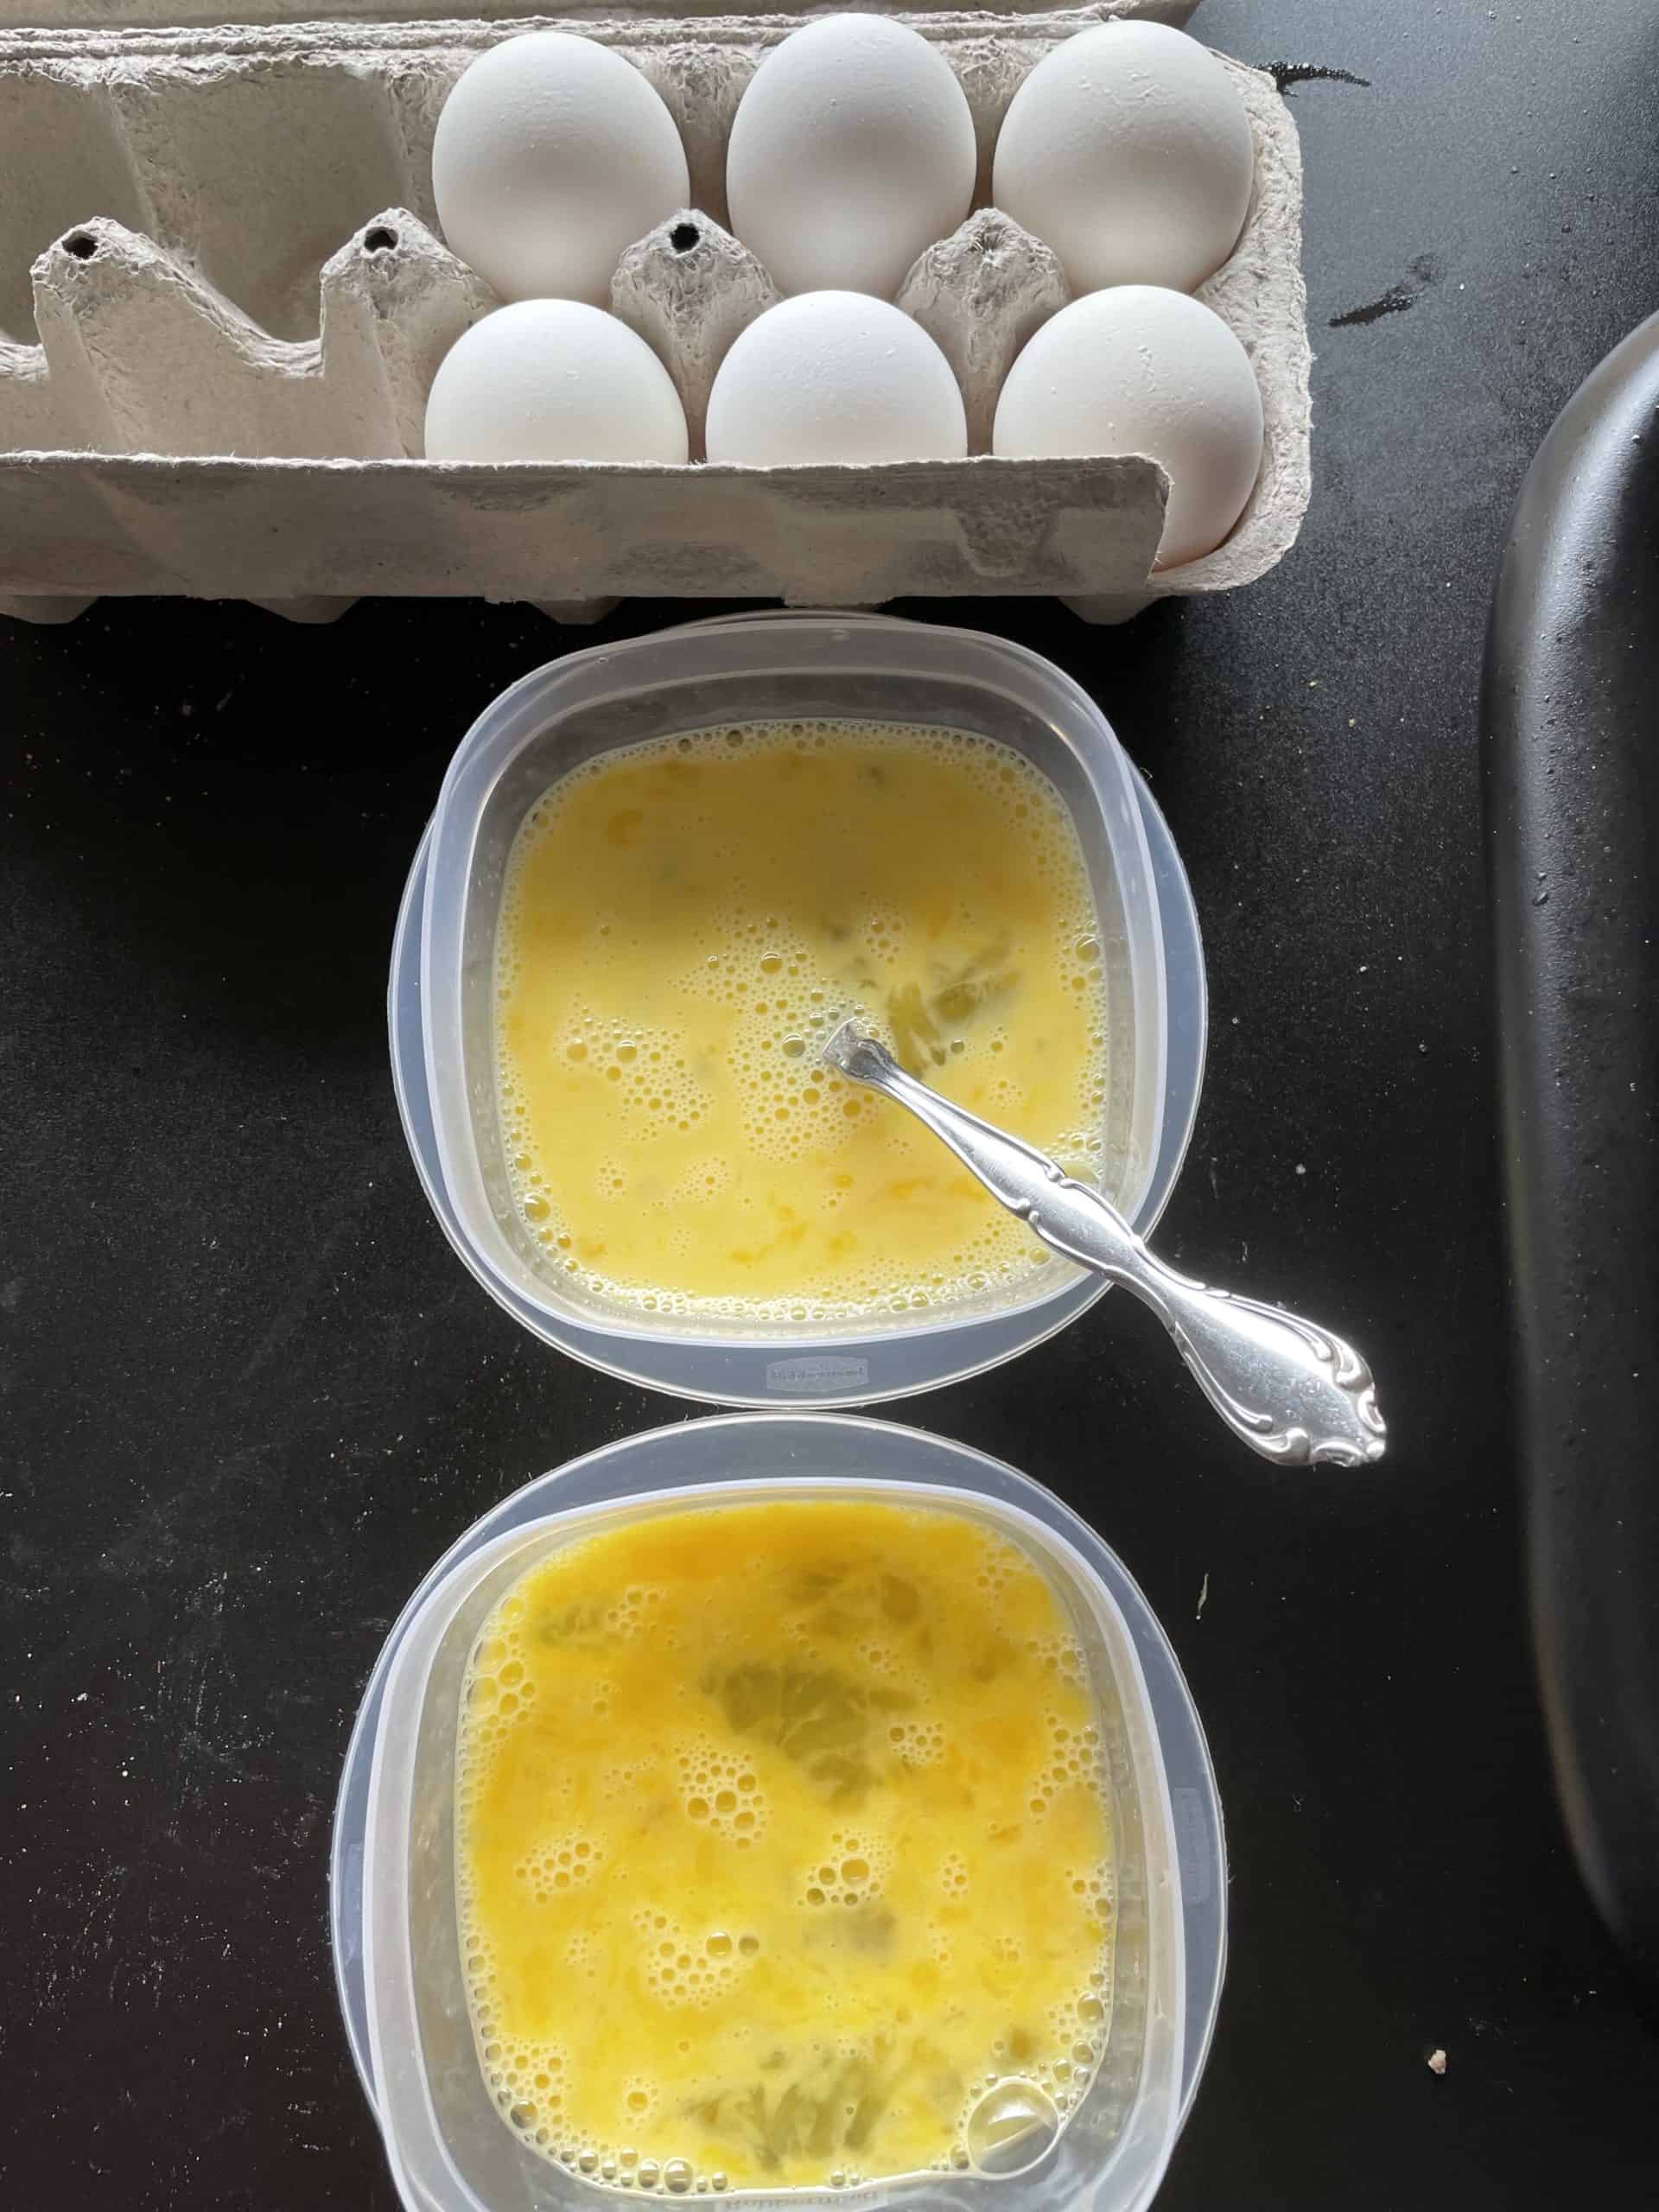 Whole eggs and two bowls of scrambled eggs.